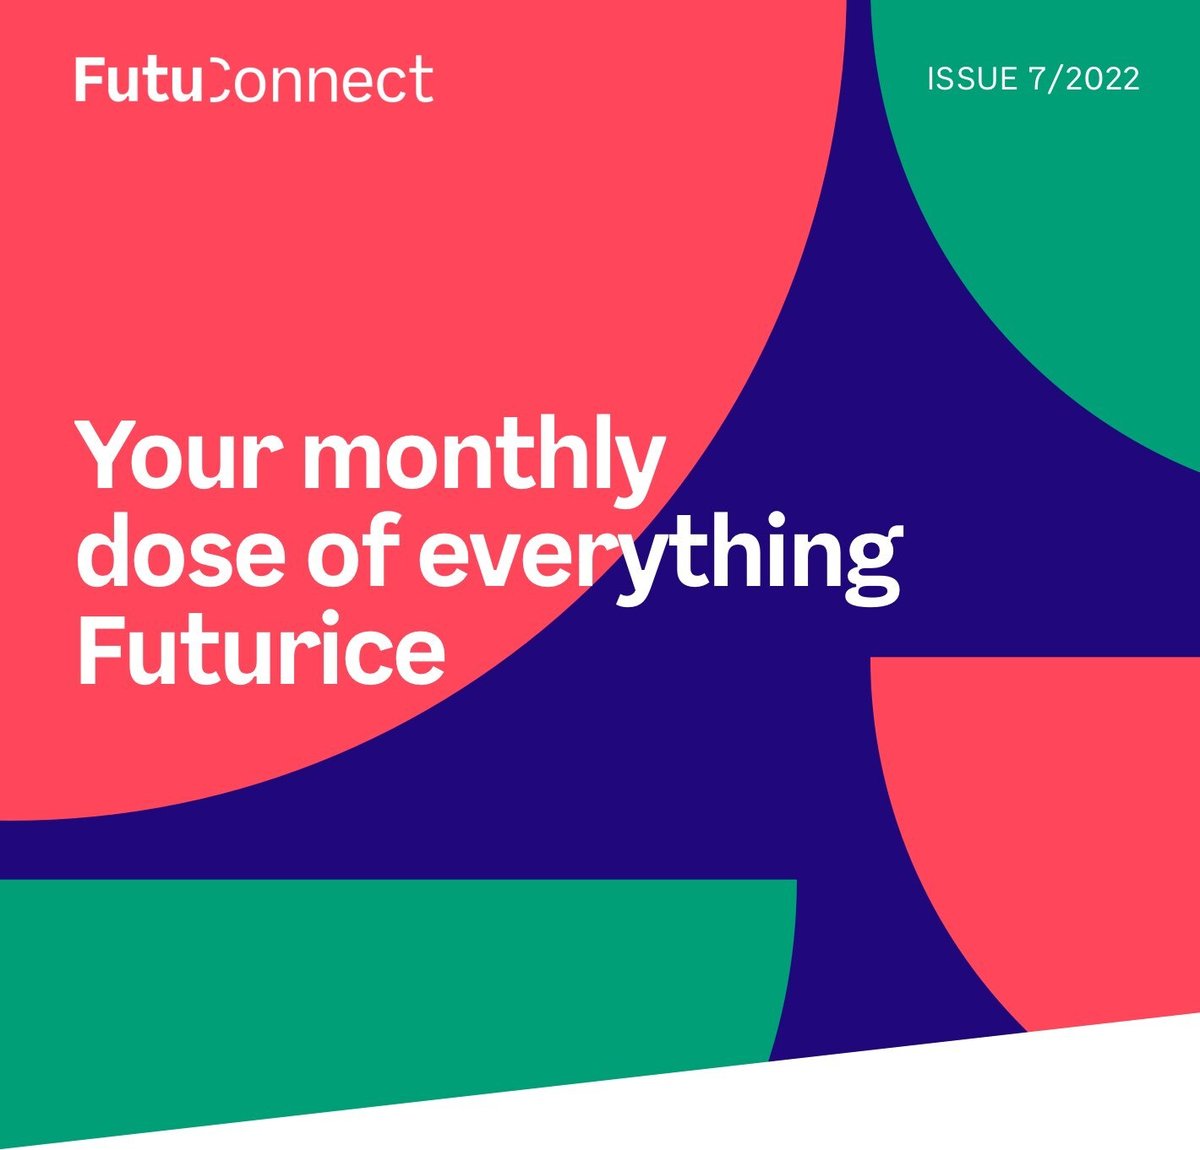 Futuconnect newsletter - issue 7